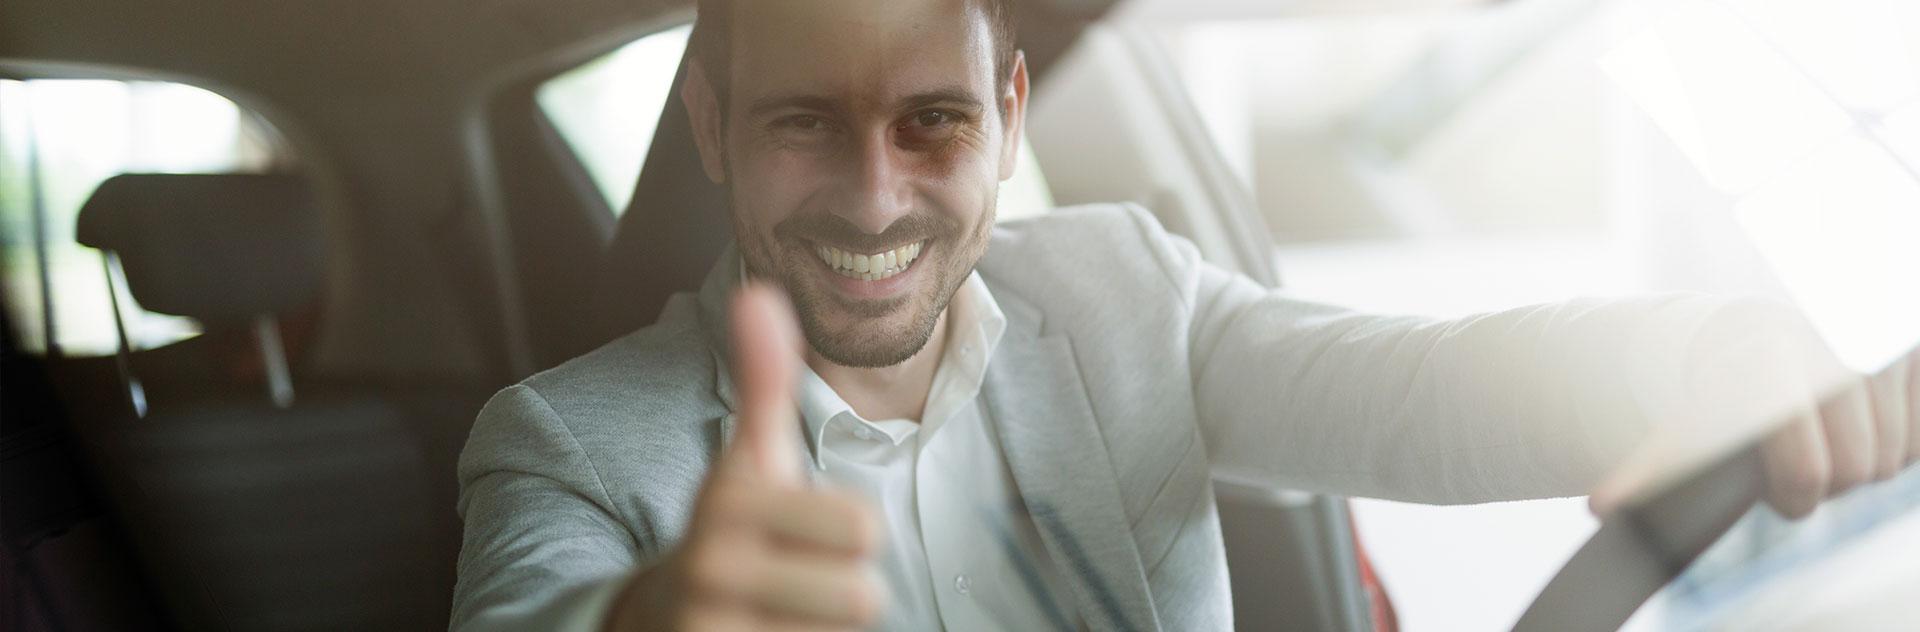 Man sits in the car and shows thumbs up